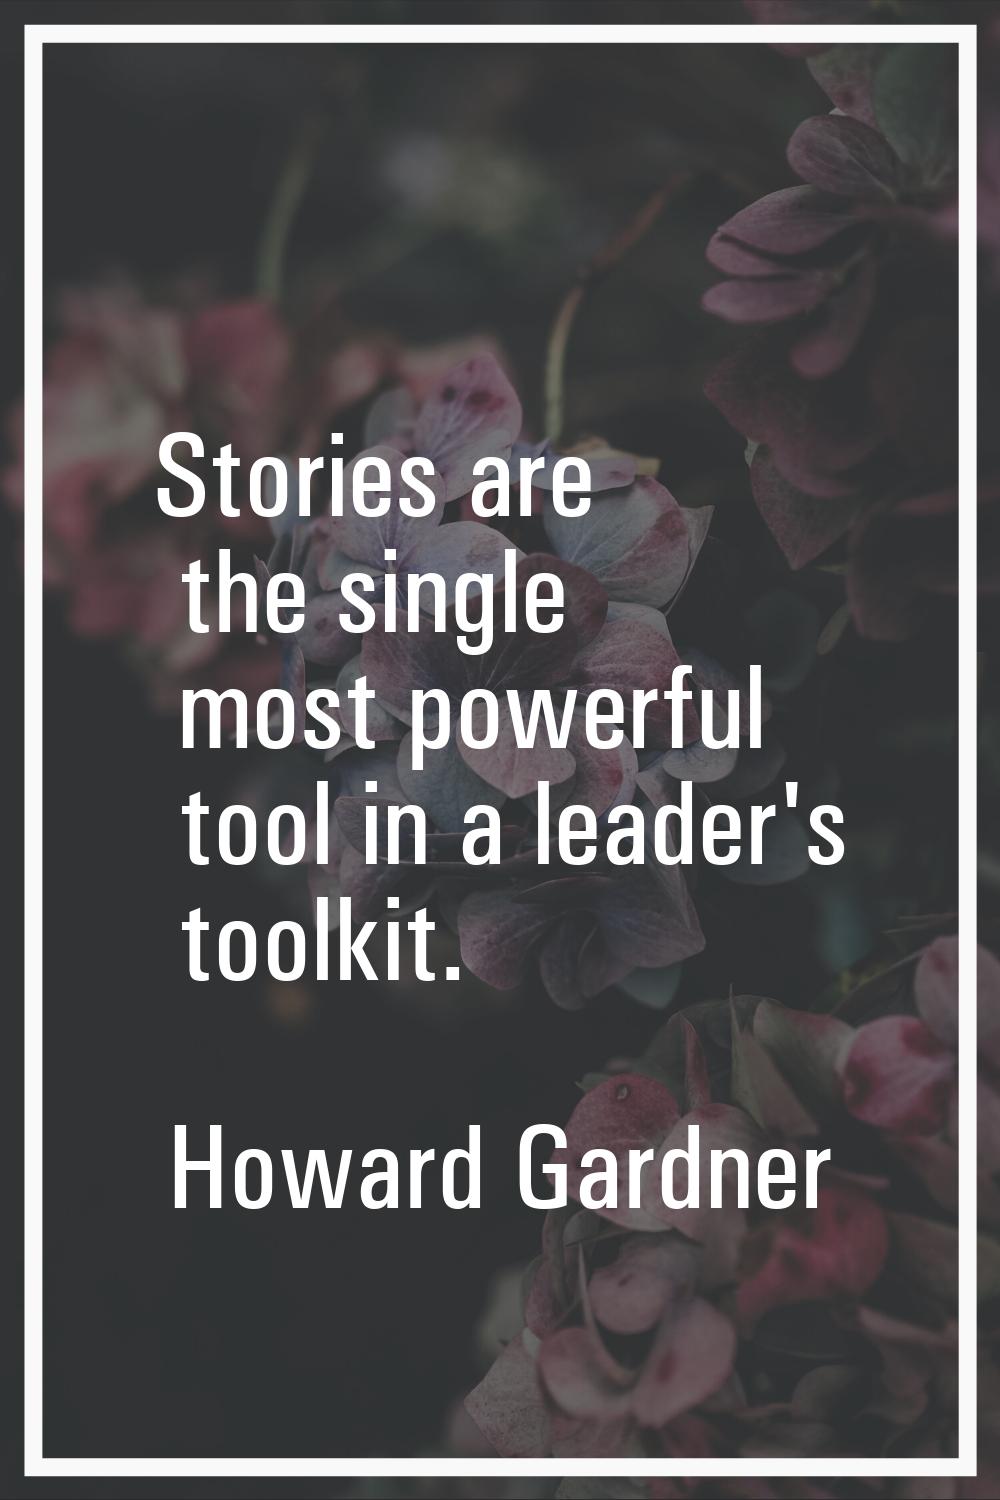 Stories are the single most powerful tool in a leader's toolkit.